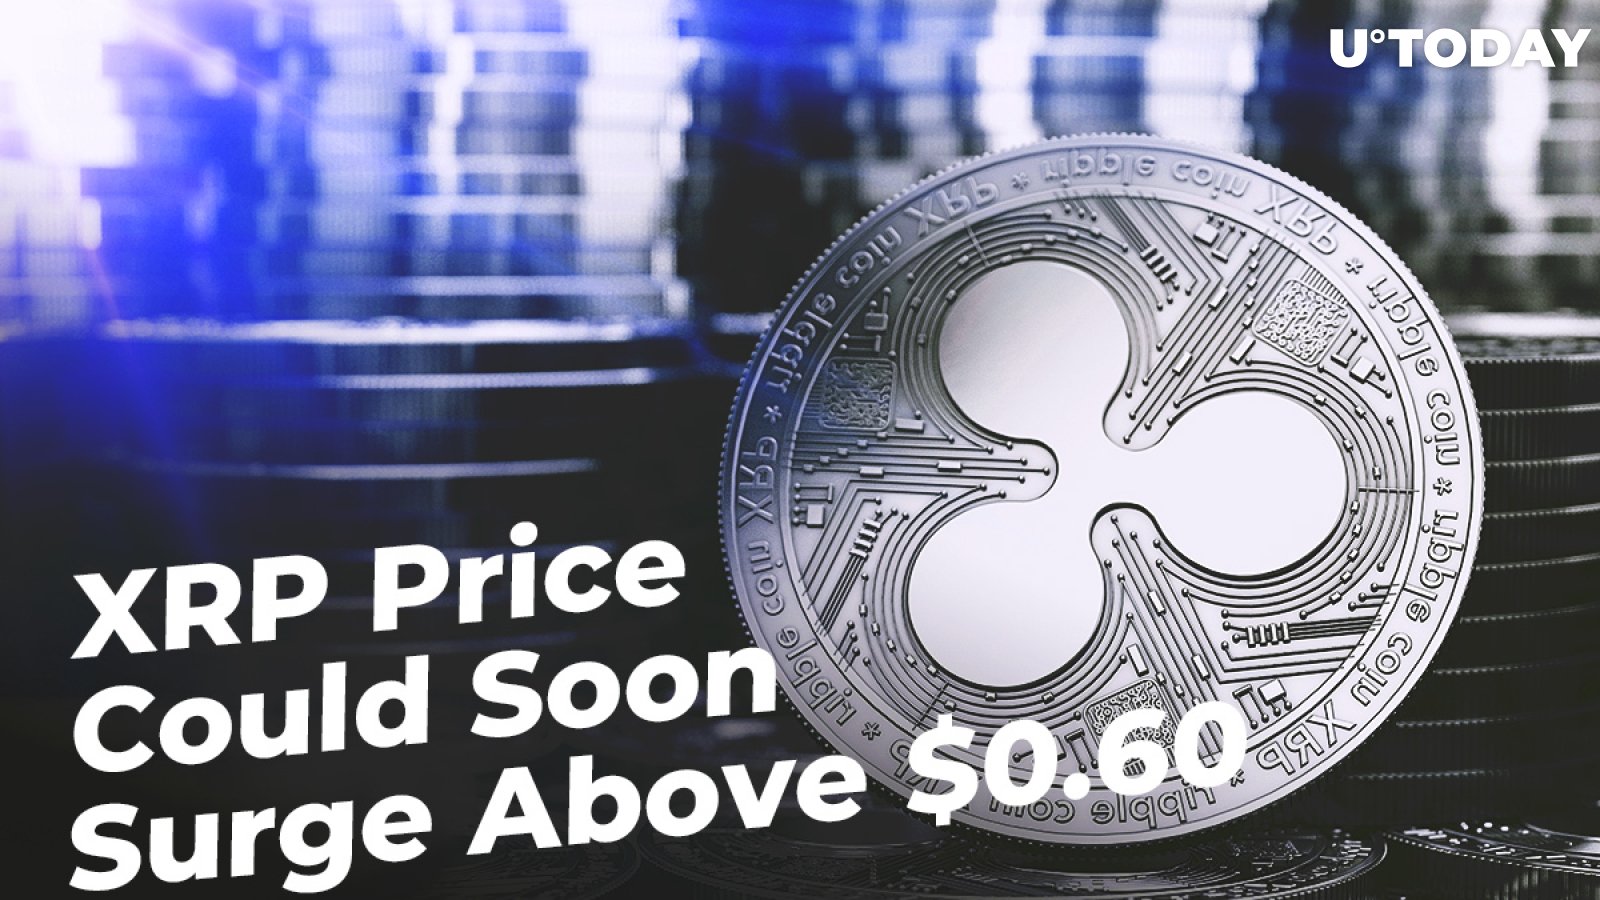 XRP Price Could Soon Surge Above $0.60, Technical Analysis Shows